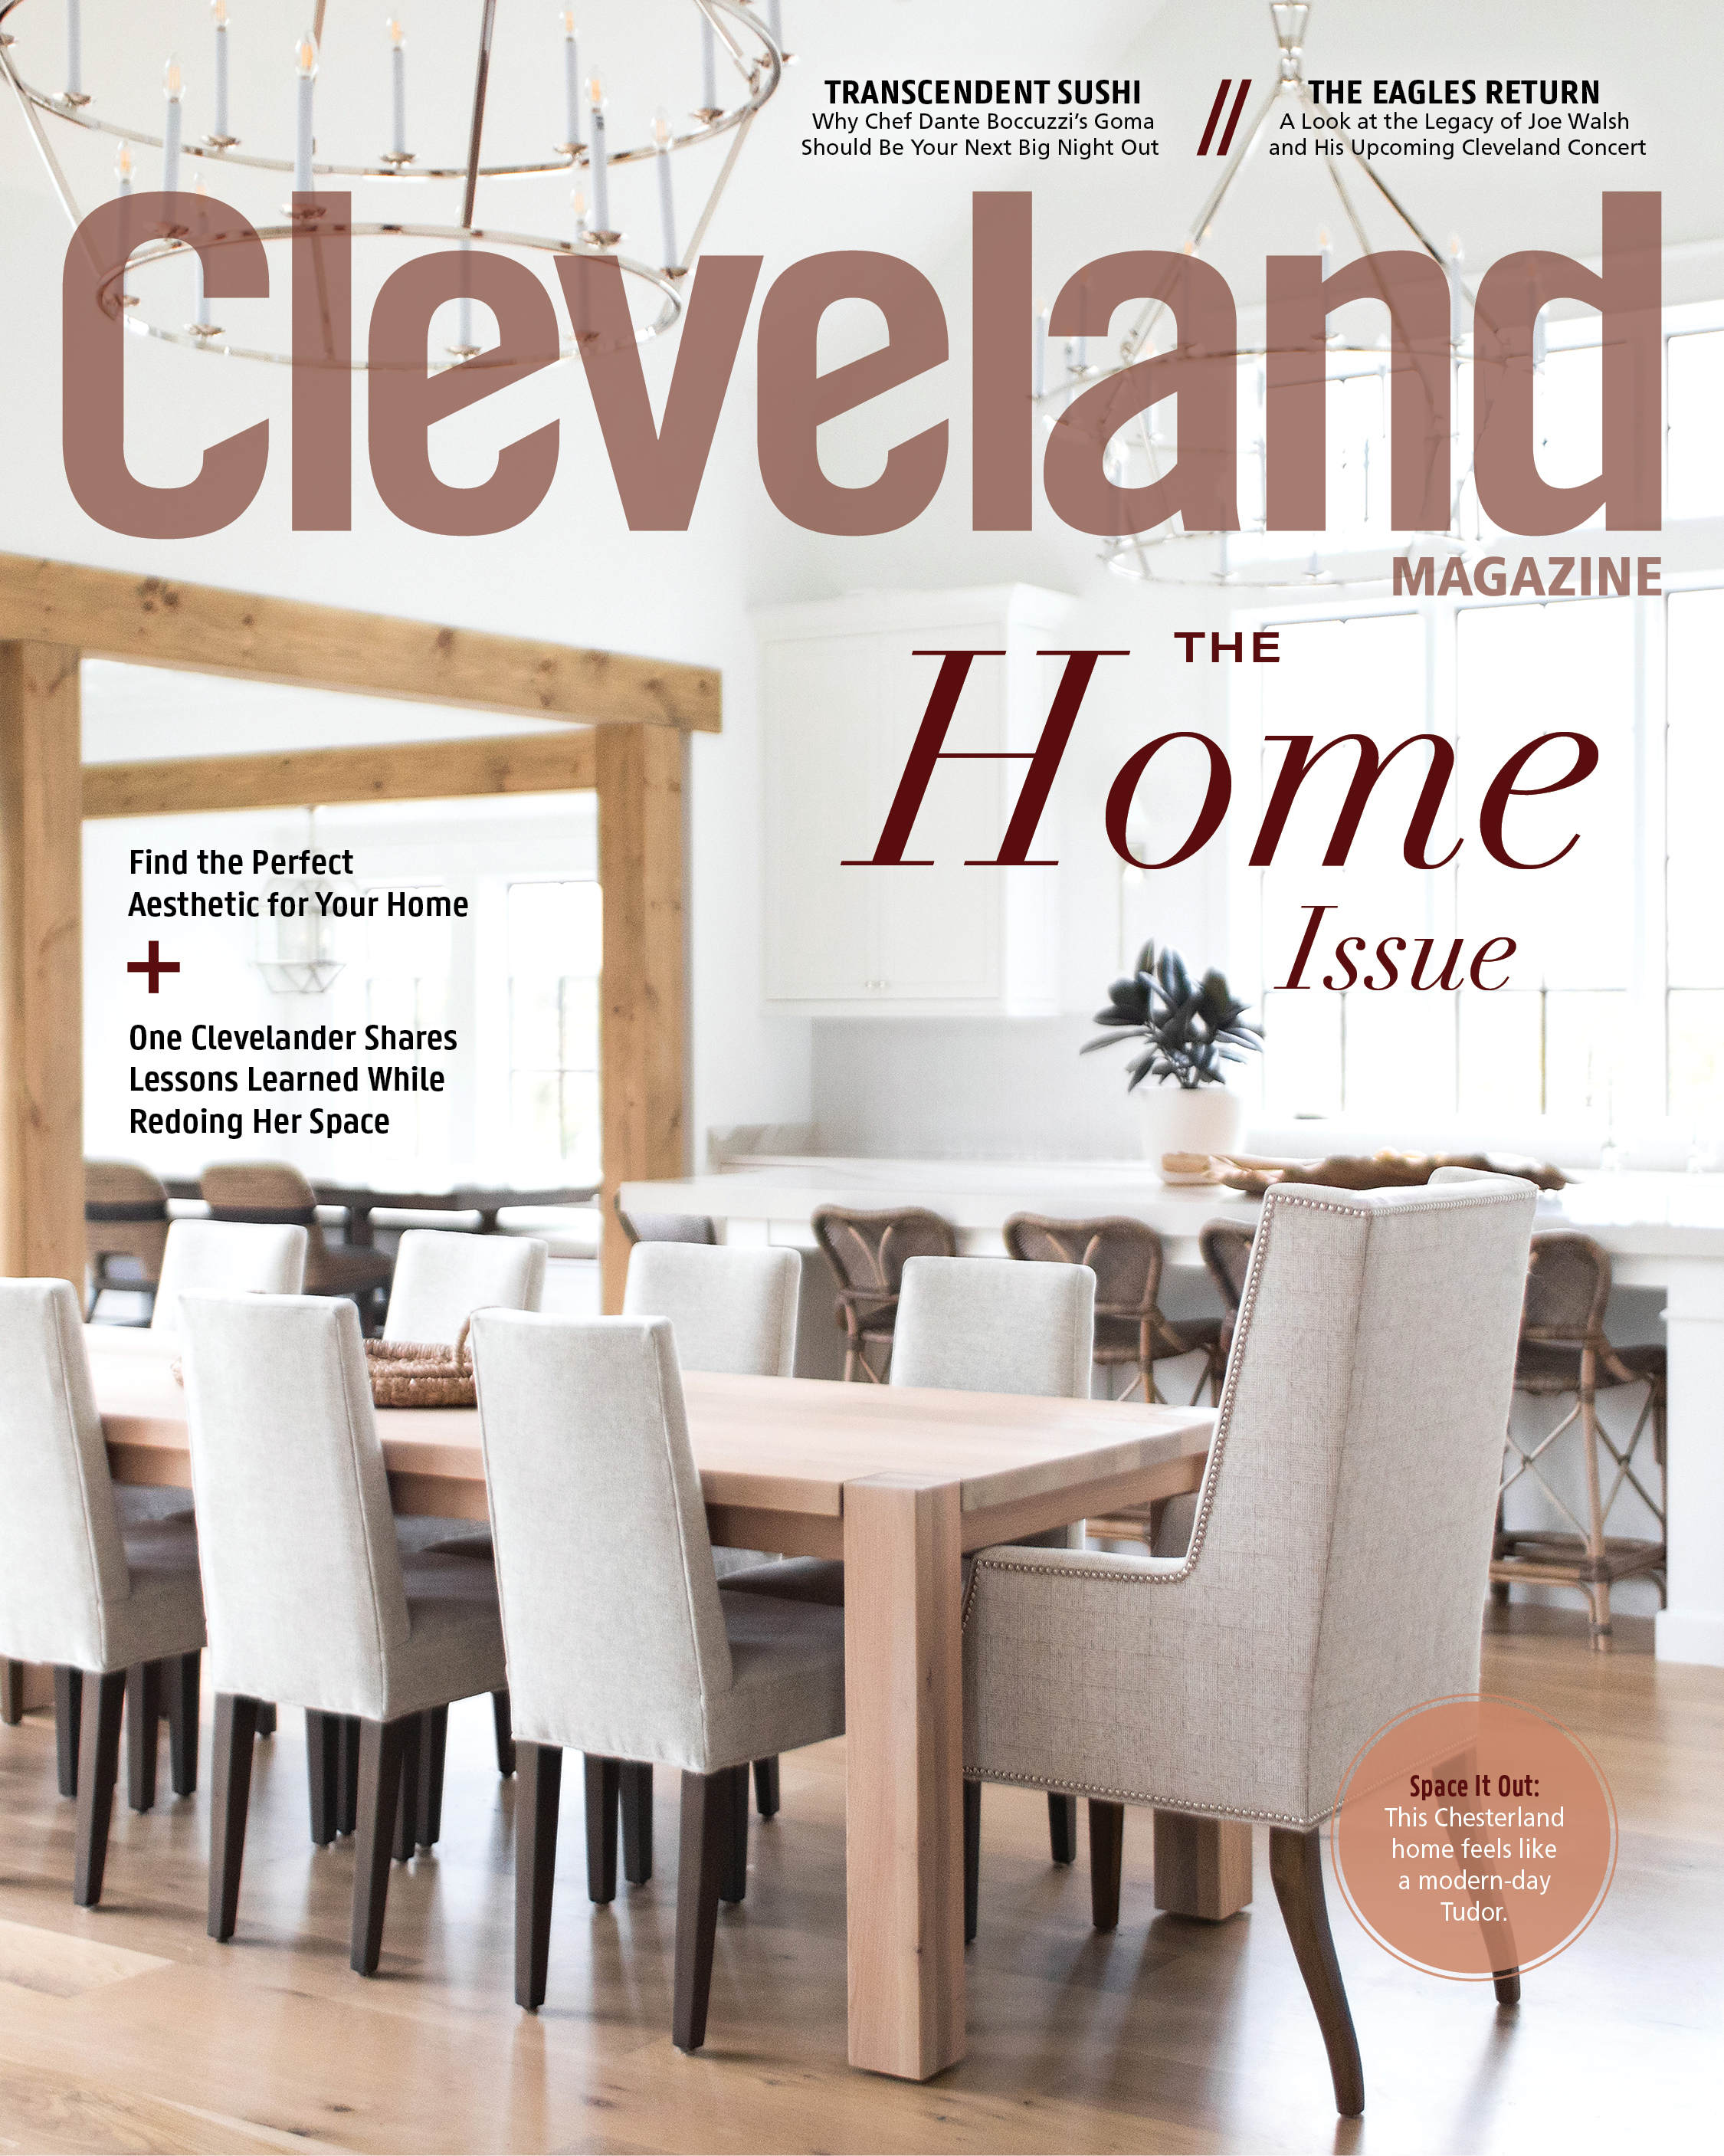 The Home Issue